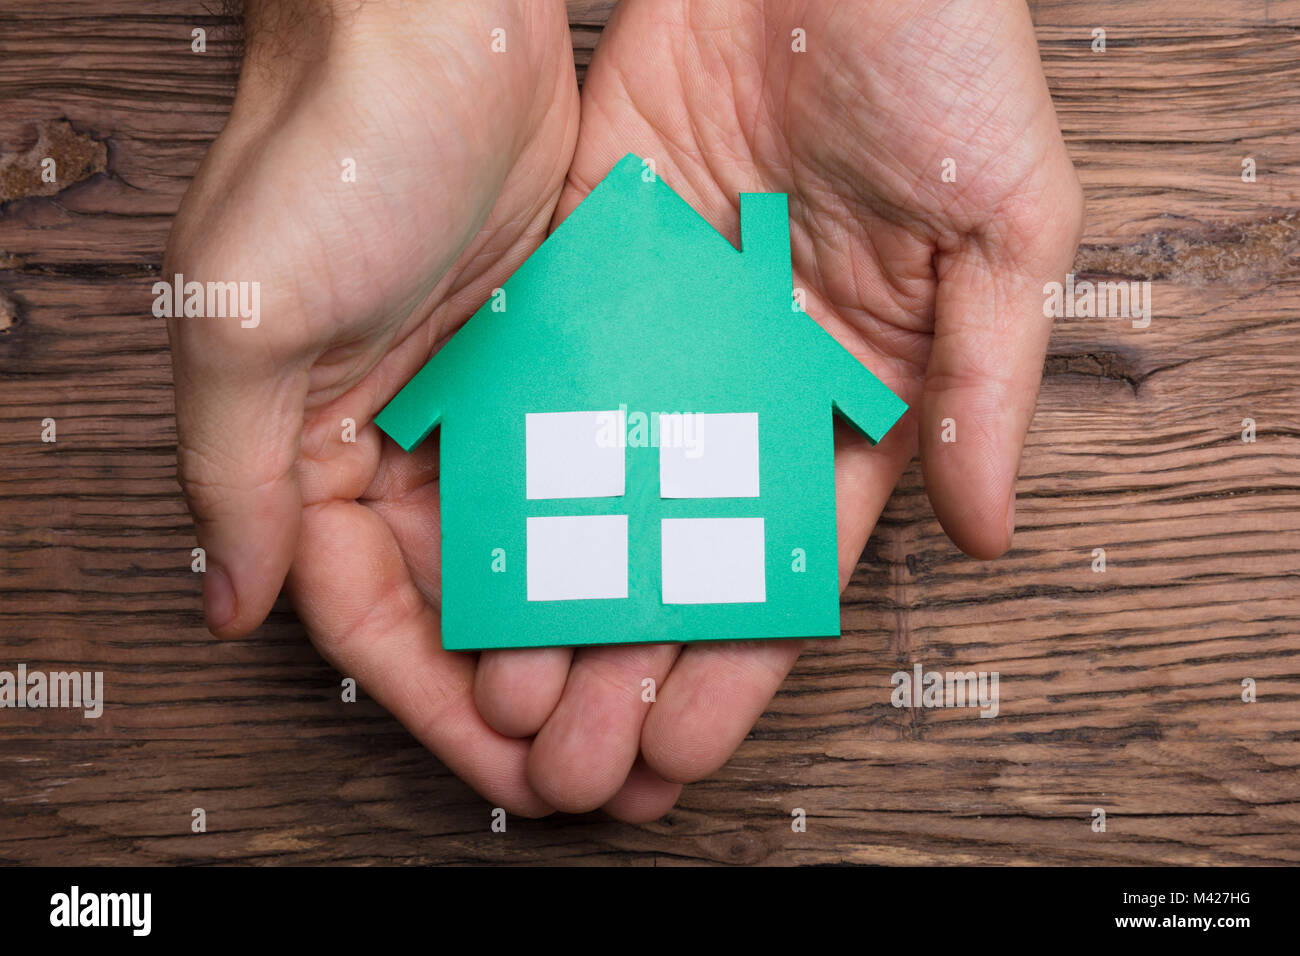 Close-up Of Hands Holding Paper House Against Wooden Table Stock Photo